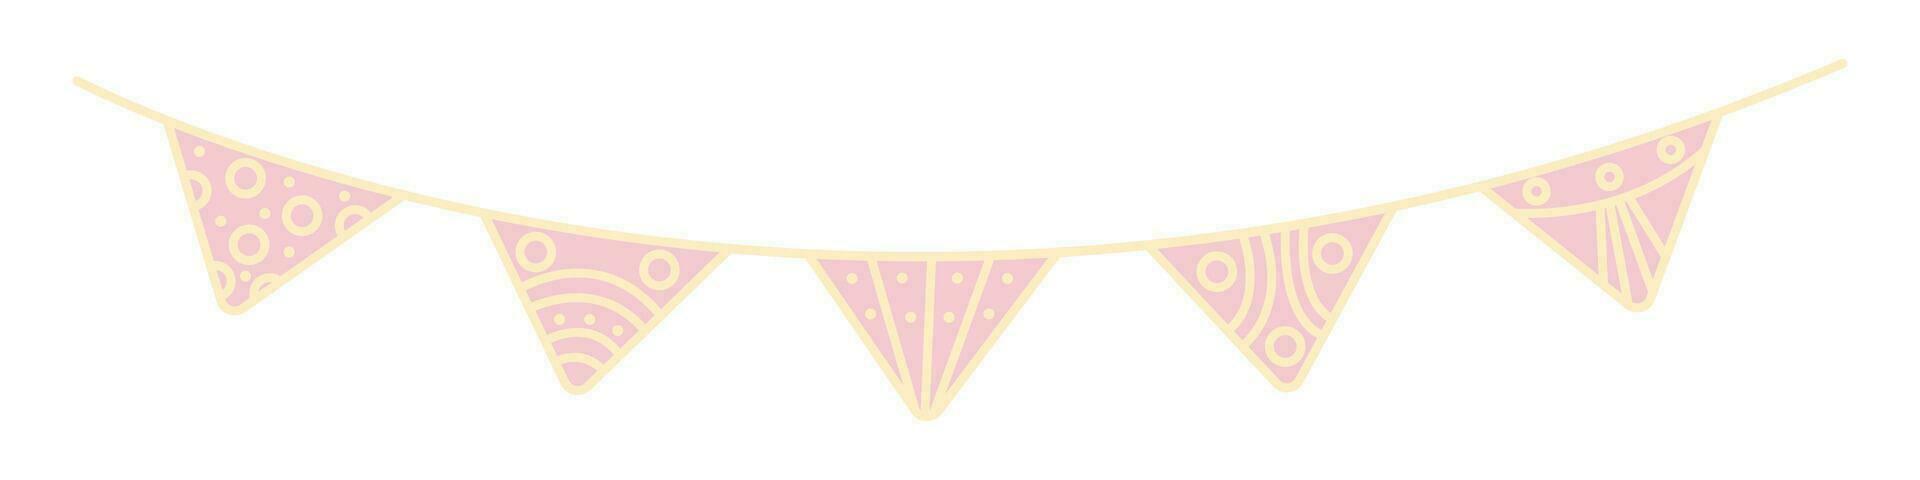 Five festive holiday triangular flags on a rope, birthday garland, hanging party pennants, cute vector illustration in light pink and yellow colors